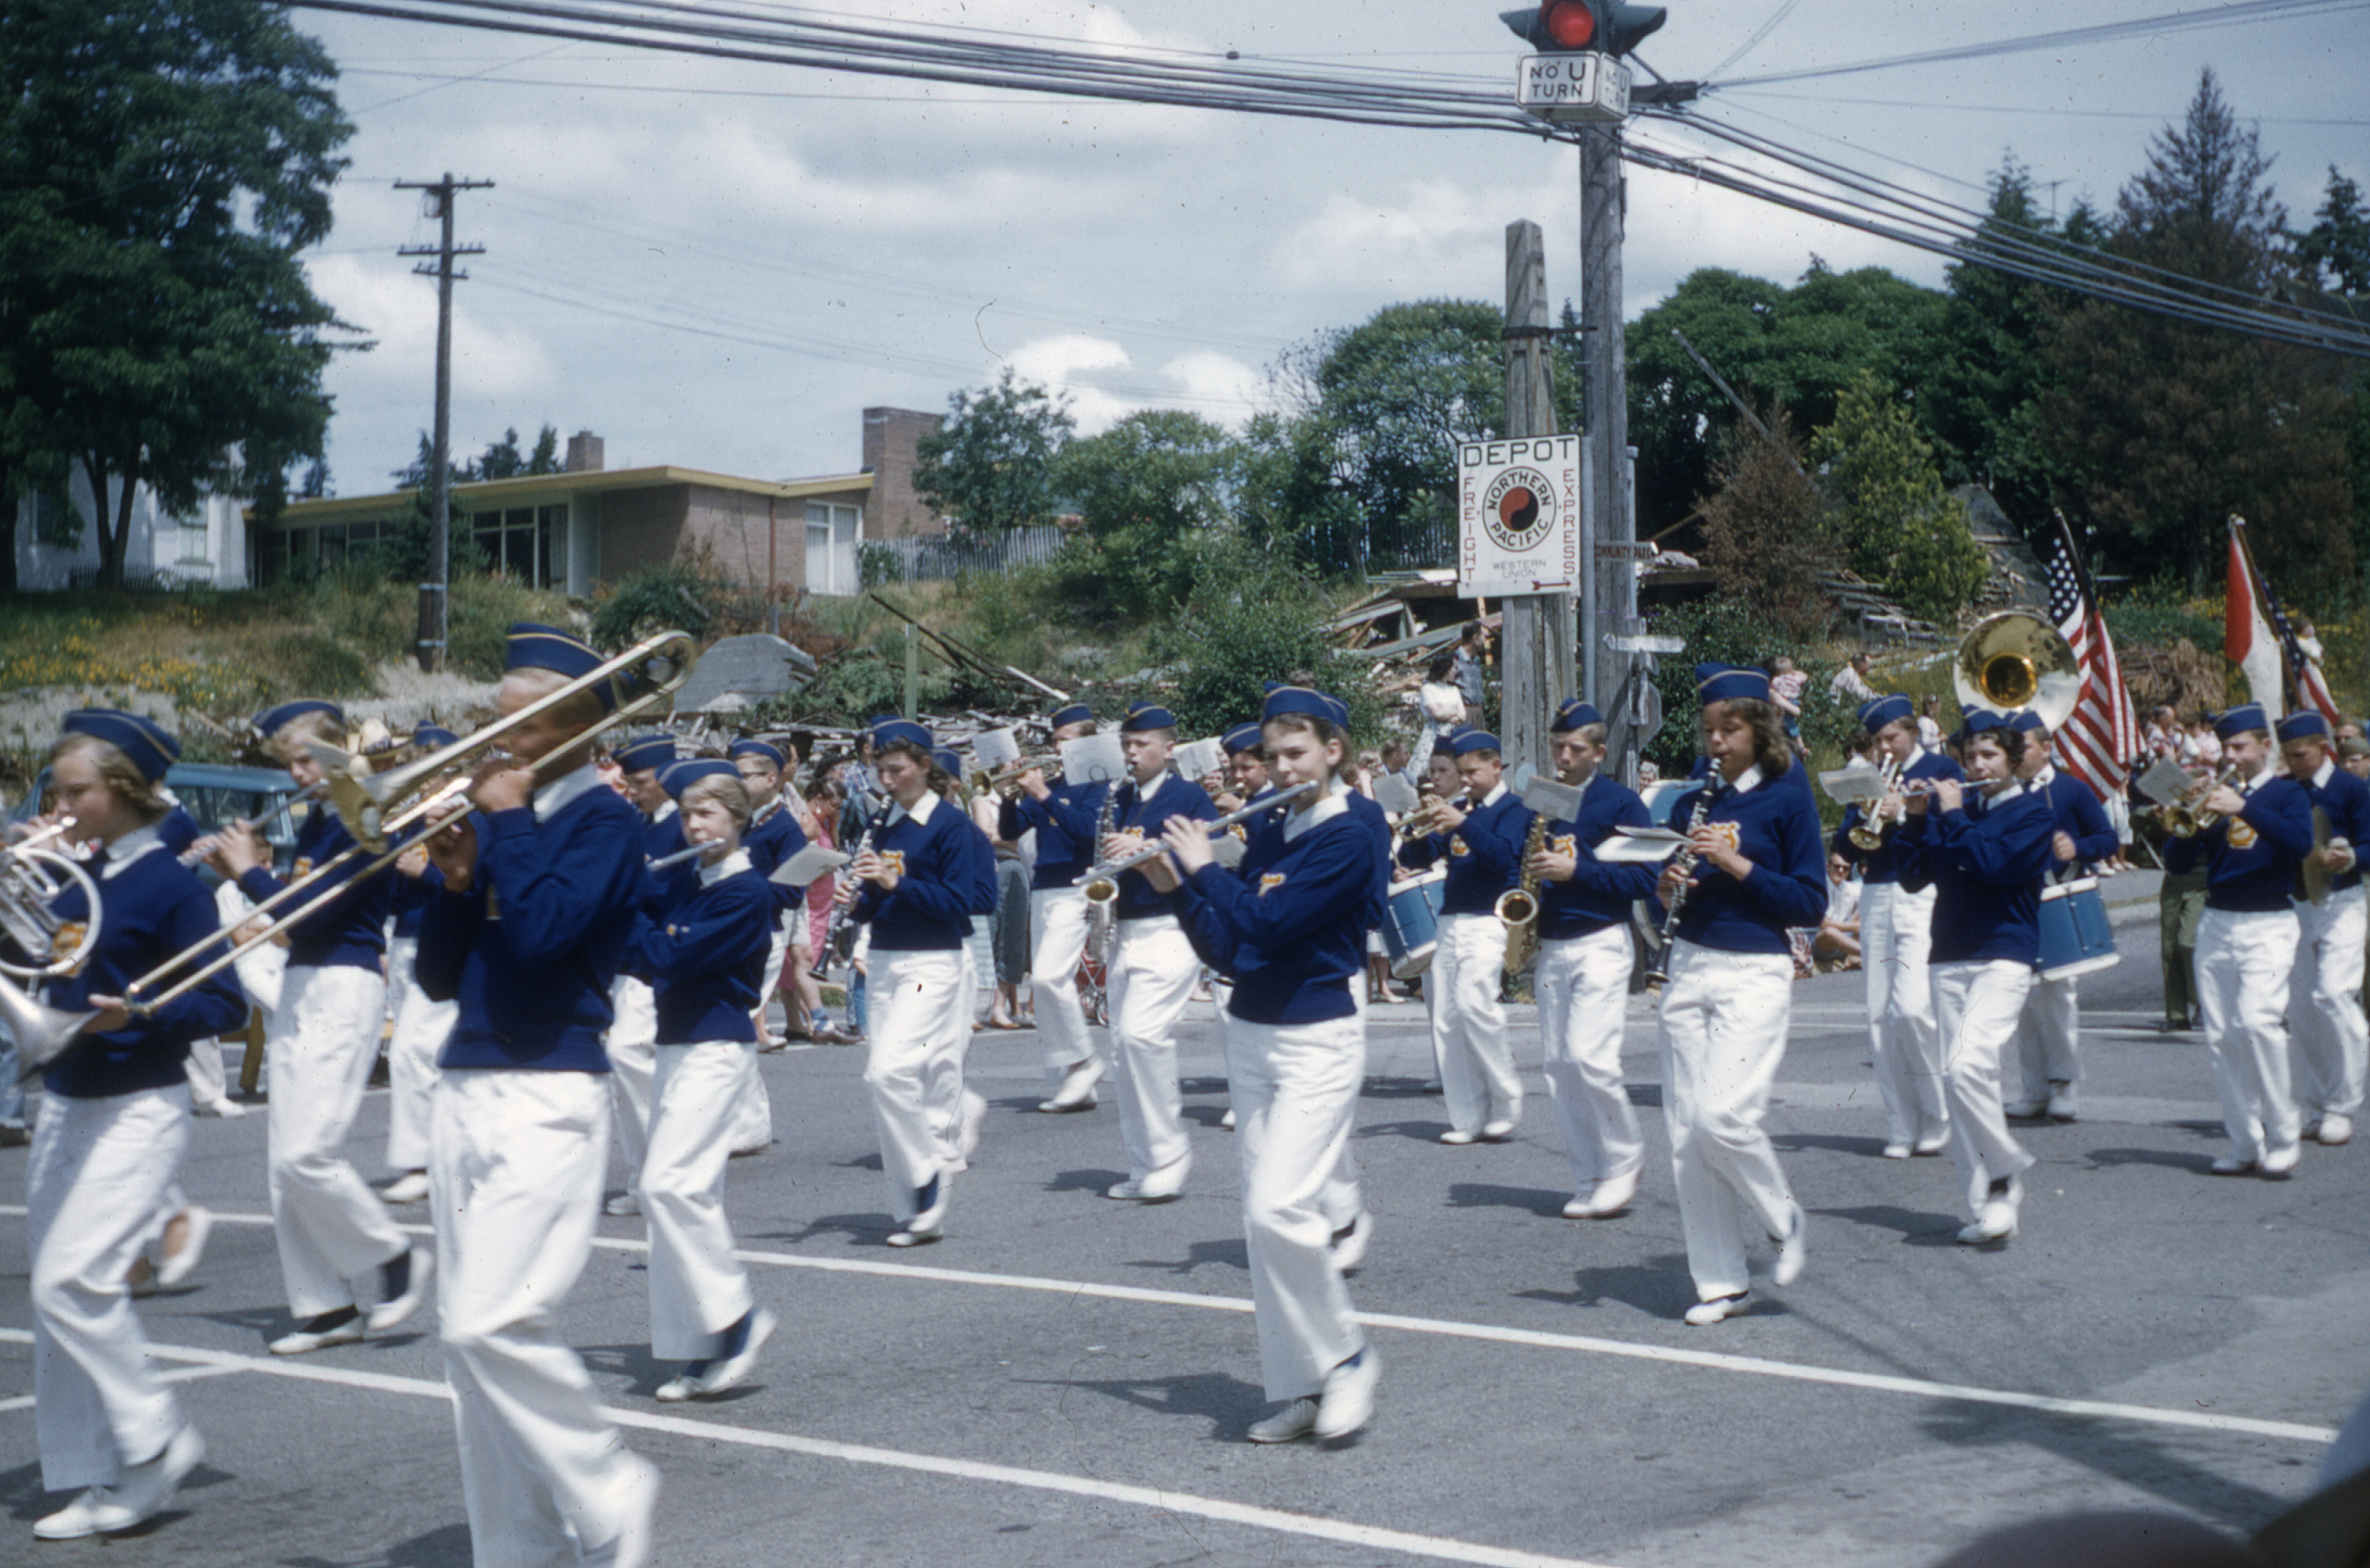 The W. A. Anderson Junior High School marching band in the 1959 Bothell 4th of July parade, at the corner of Main St. and 2nd St. (now 102nd Avenue NE). The debris behind them is the demolished structure of the Methodist Church that stood there from 1890 until 1958, when a new church building opened on West Hill. (It is possible that this picture is from the 1958 parade--there is disagreement. If it could be determined when the bank building went up on the old church site, the date could be better established.)